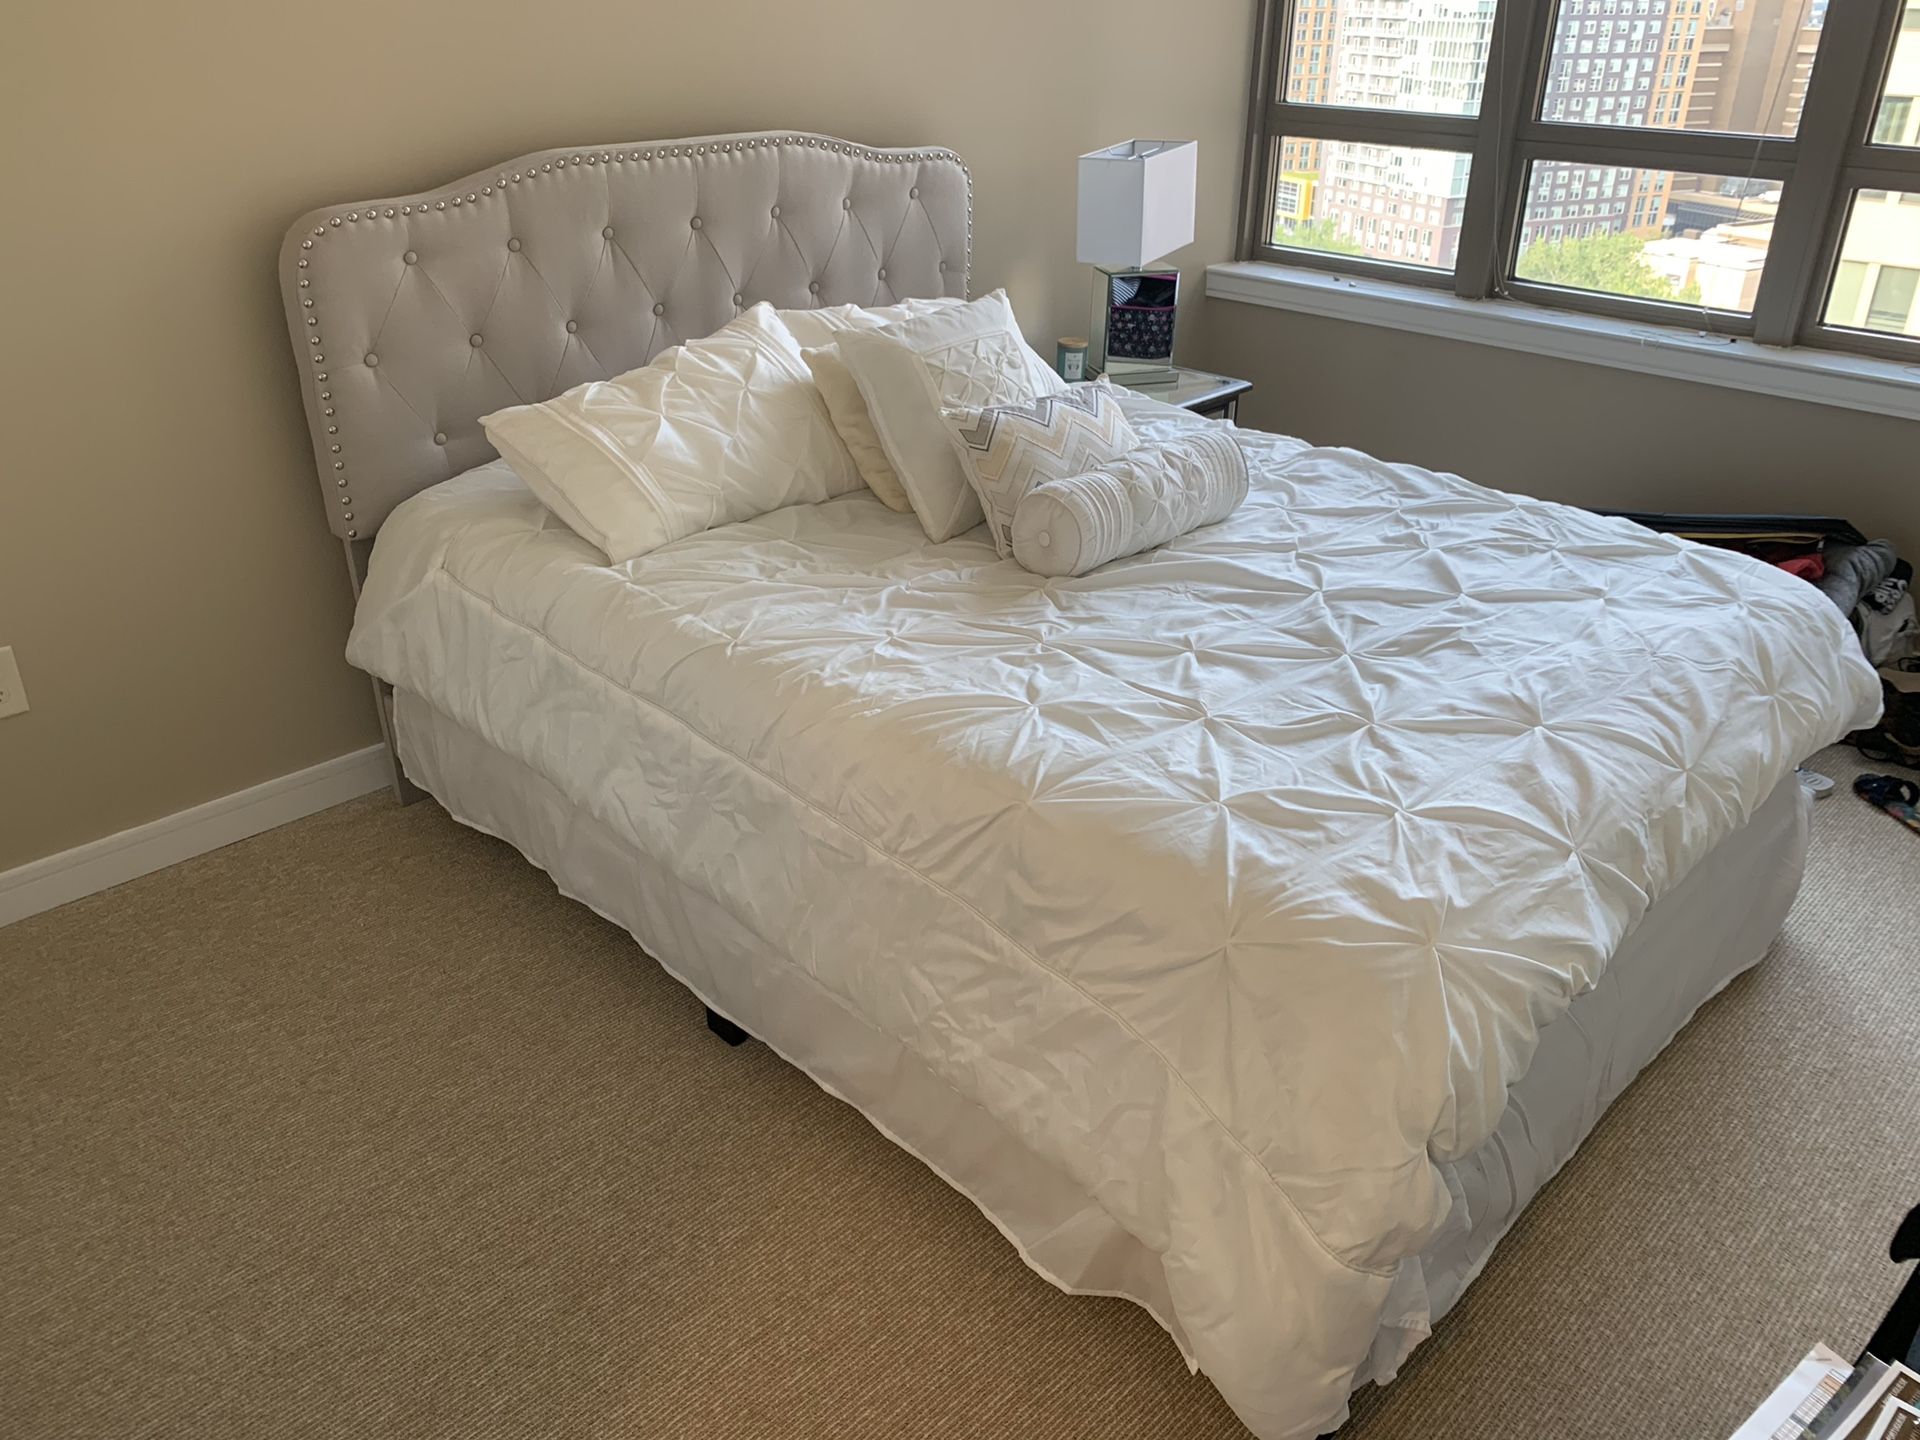 Queen Bed Complete set! (Bed, box, bed frame and mattress) Like new! 25 days used